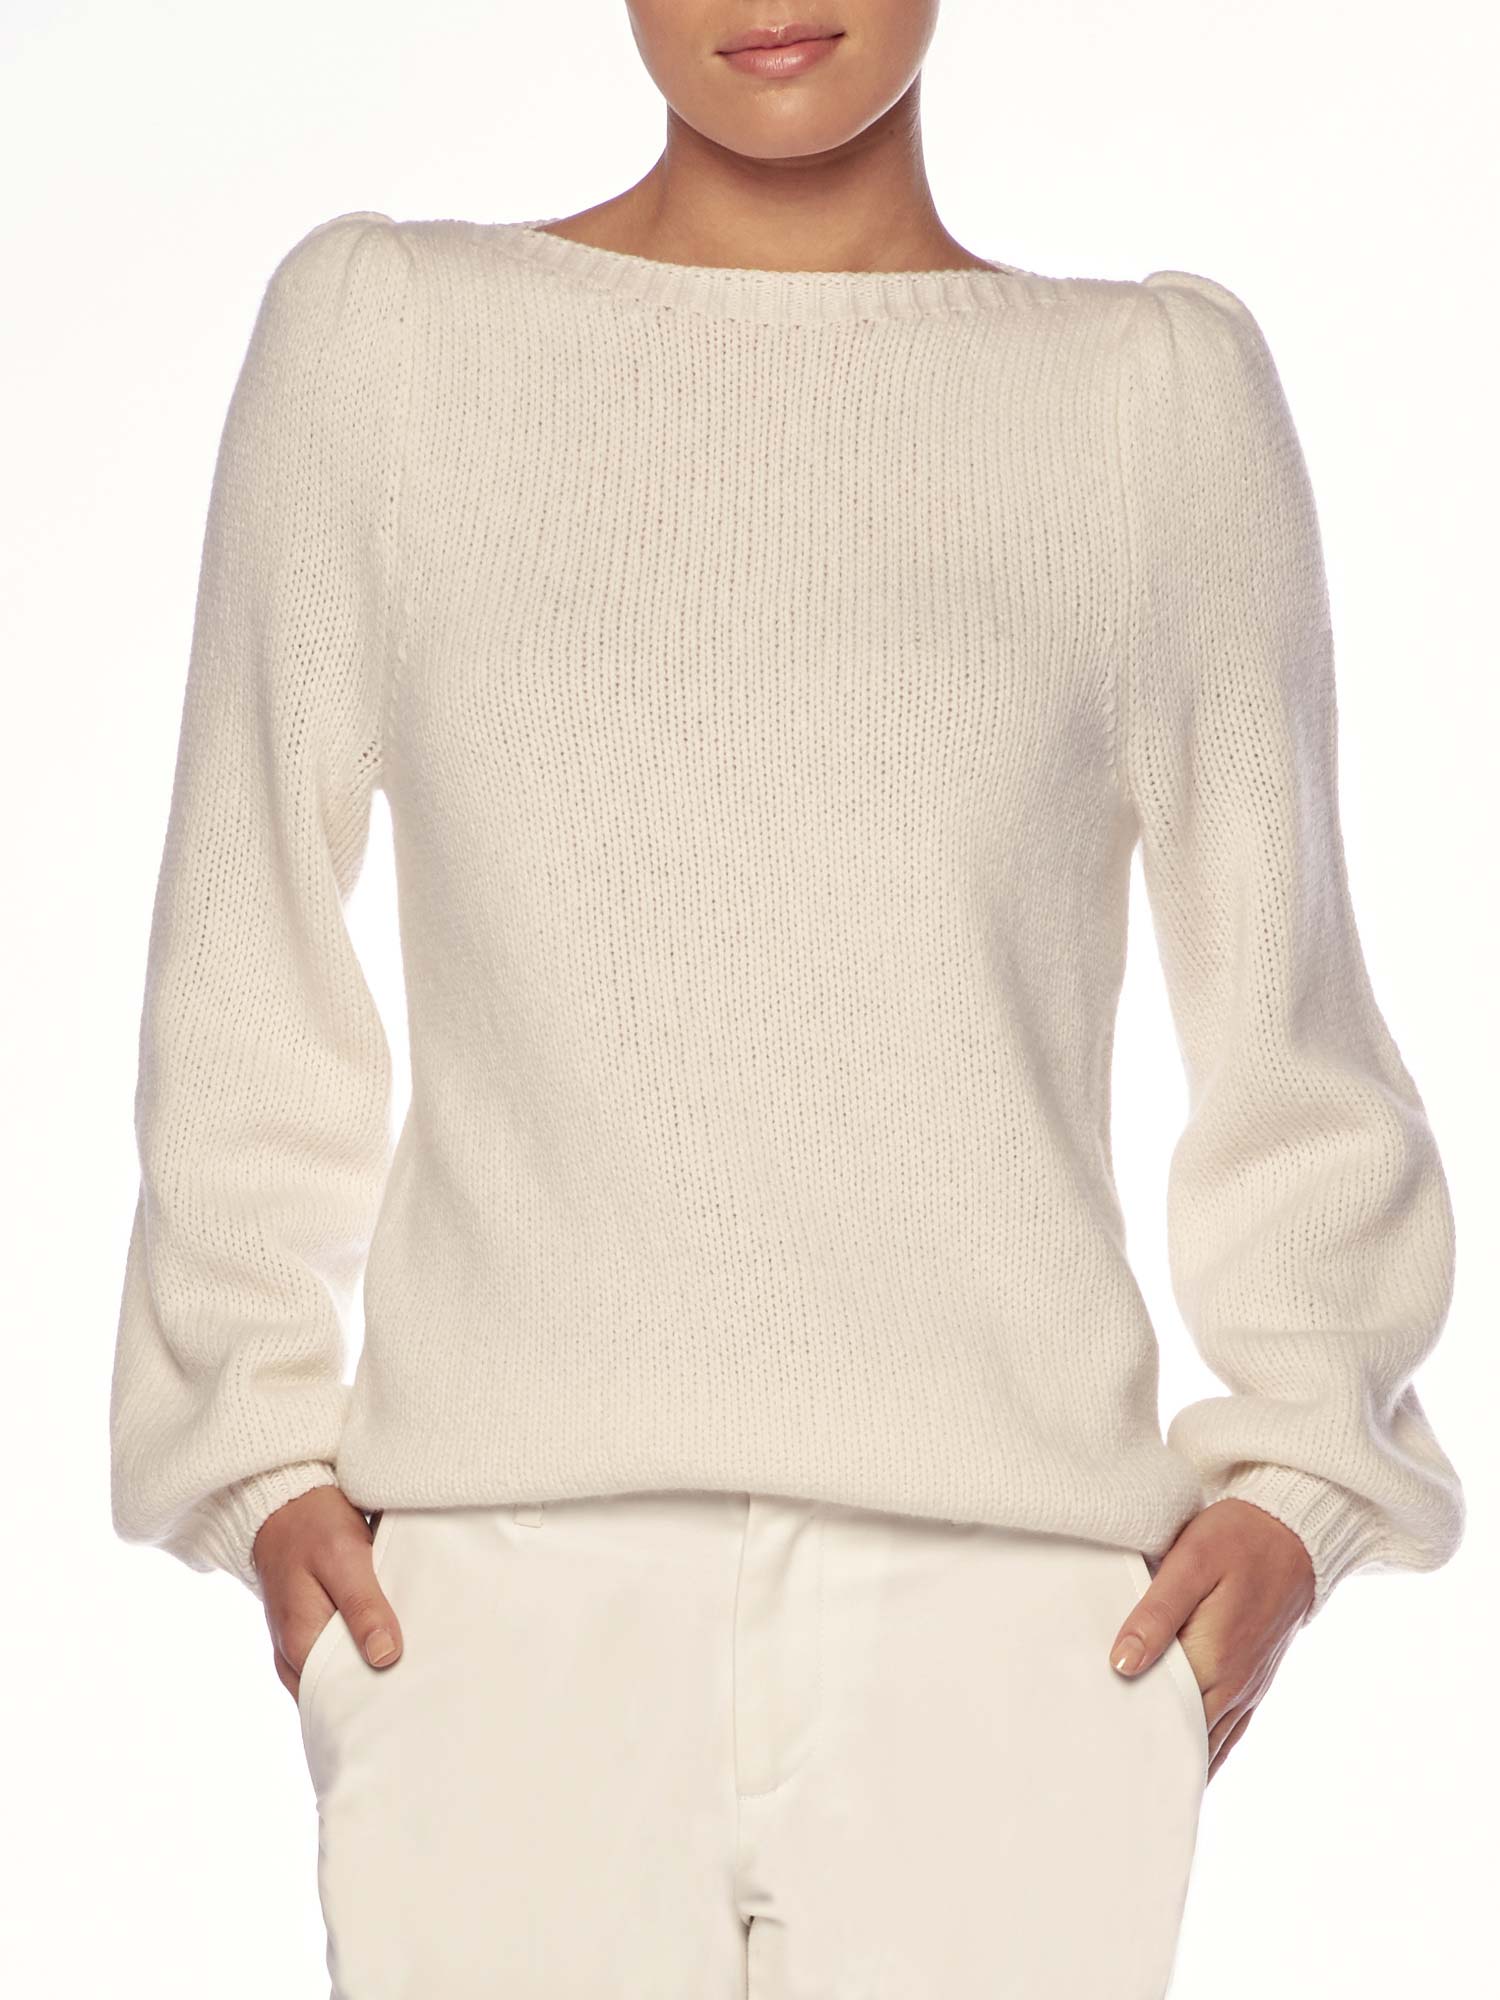 Delphi cashmere boatneck white sweater front view